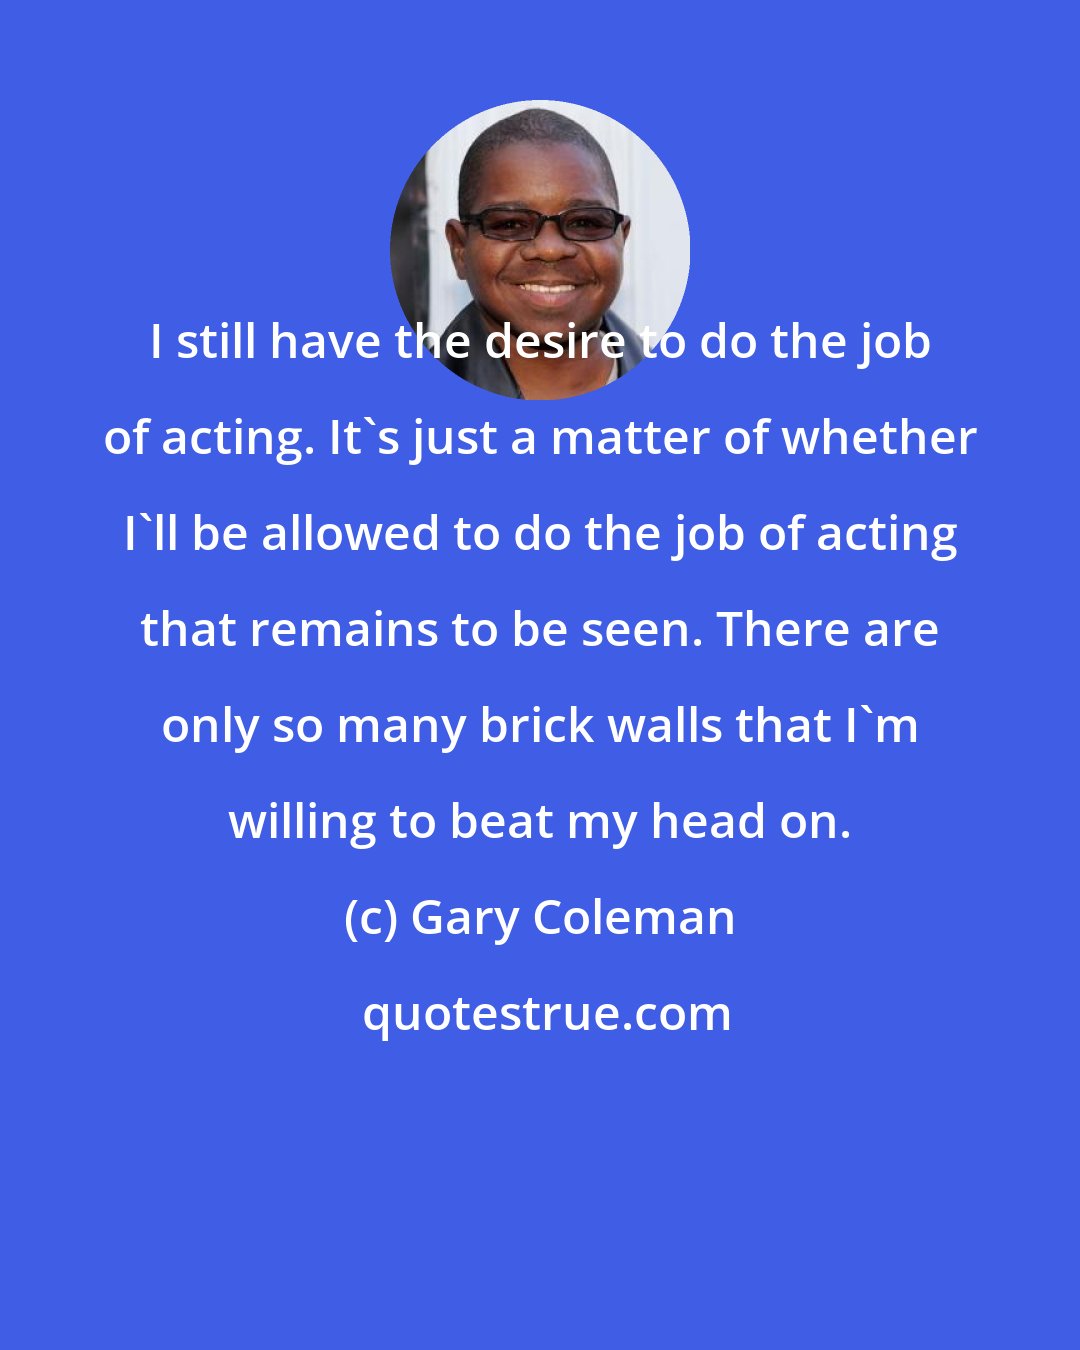 Gary Coleman: I still have the desire to do the job of acting. It's just a matter of whether I'll be allowed to do the job of acting that remains to be seen. There are only so many brick walls that I'm willing to beat my head on.